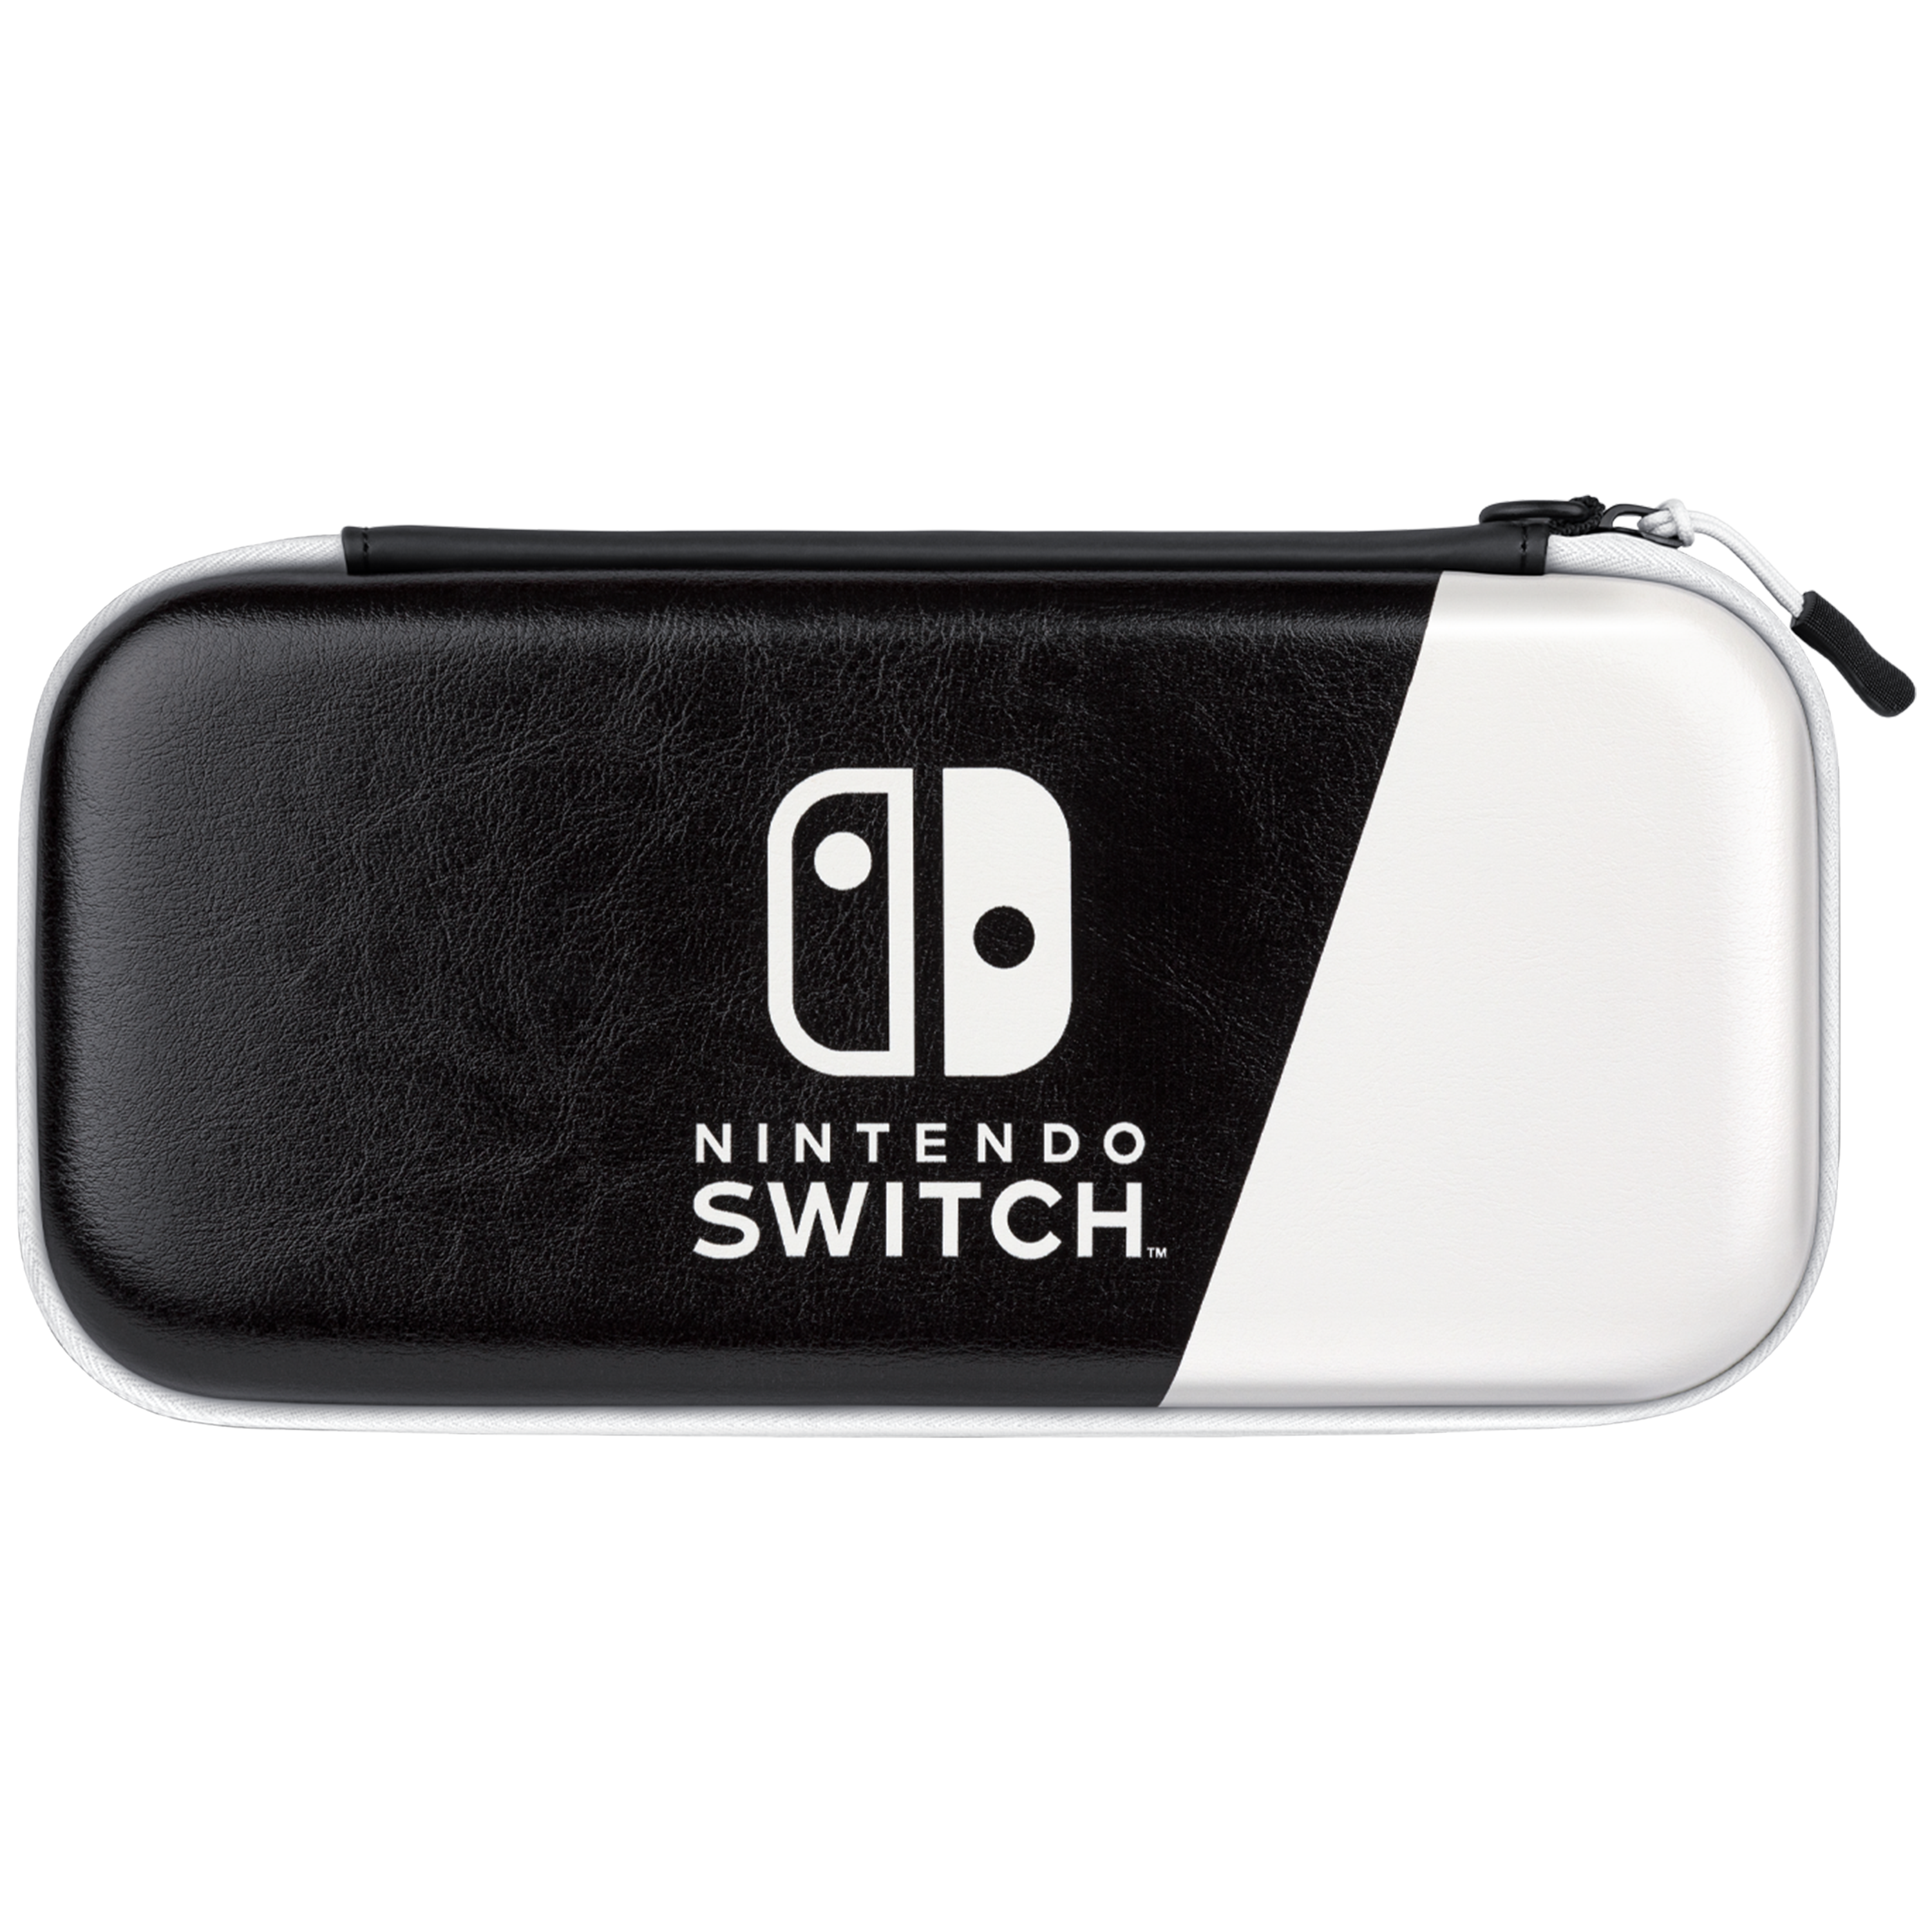 Nintendo Switch OLED Model is back in stock at